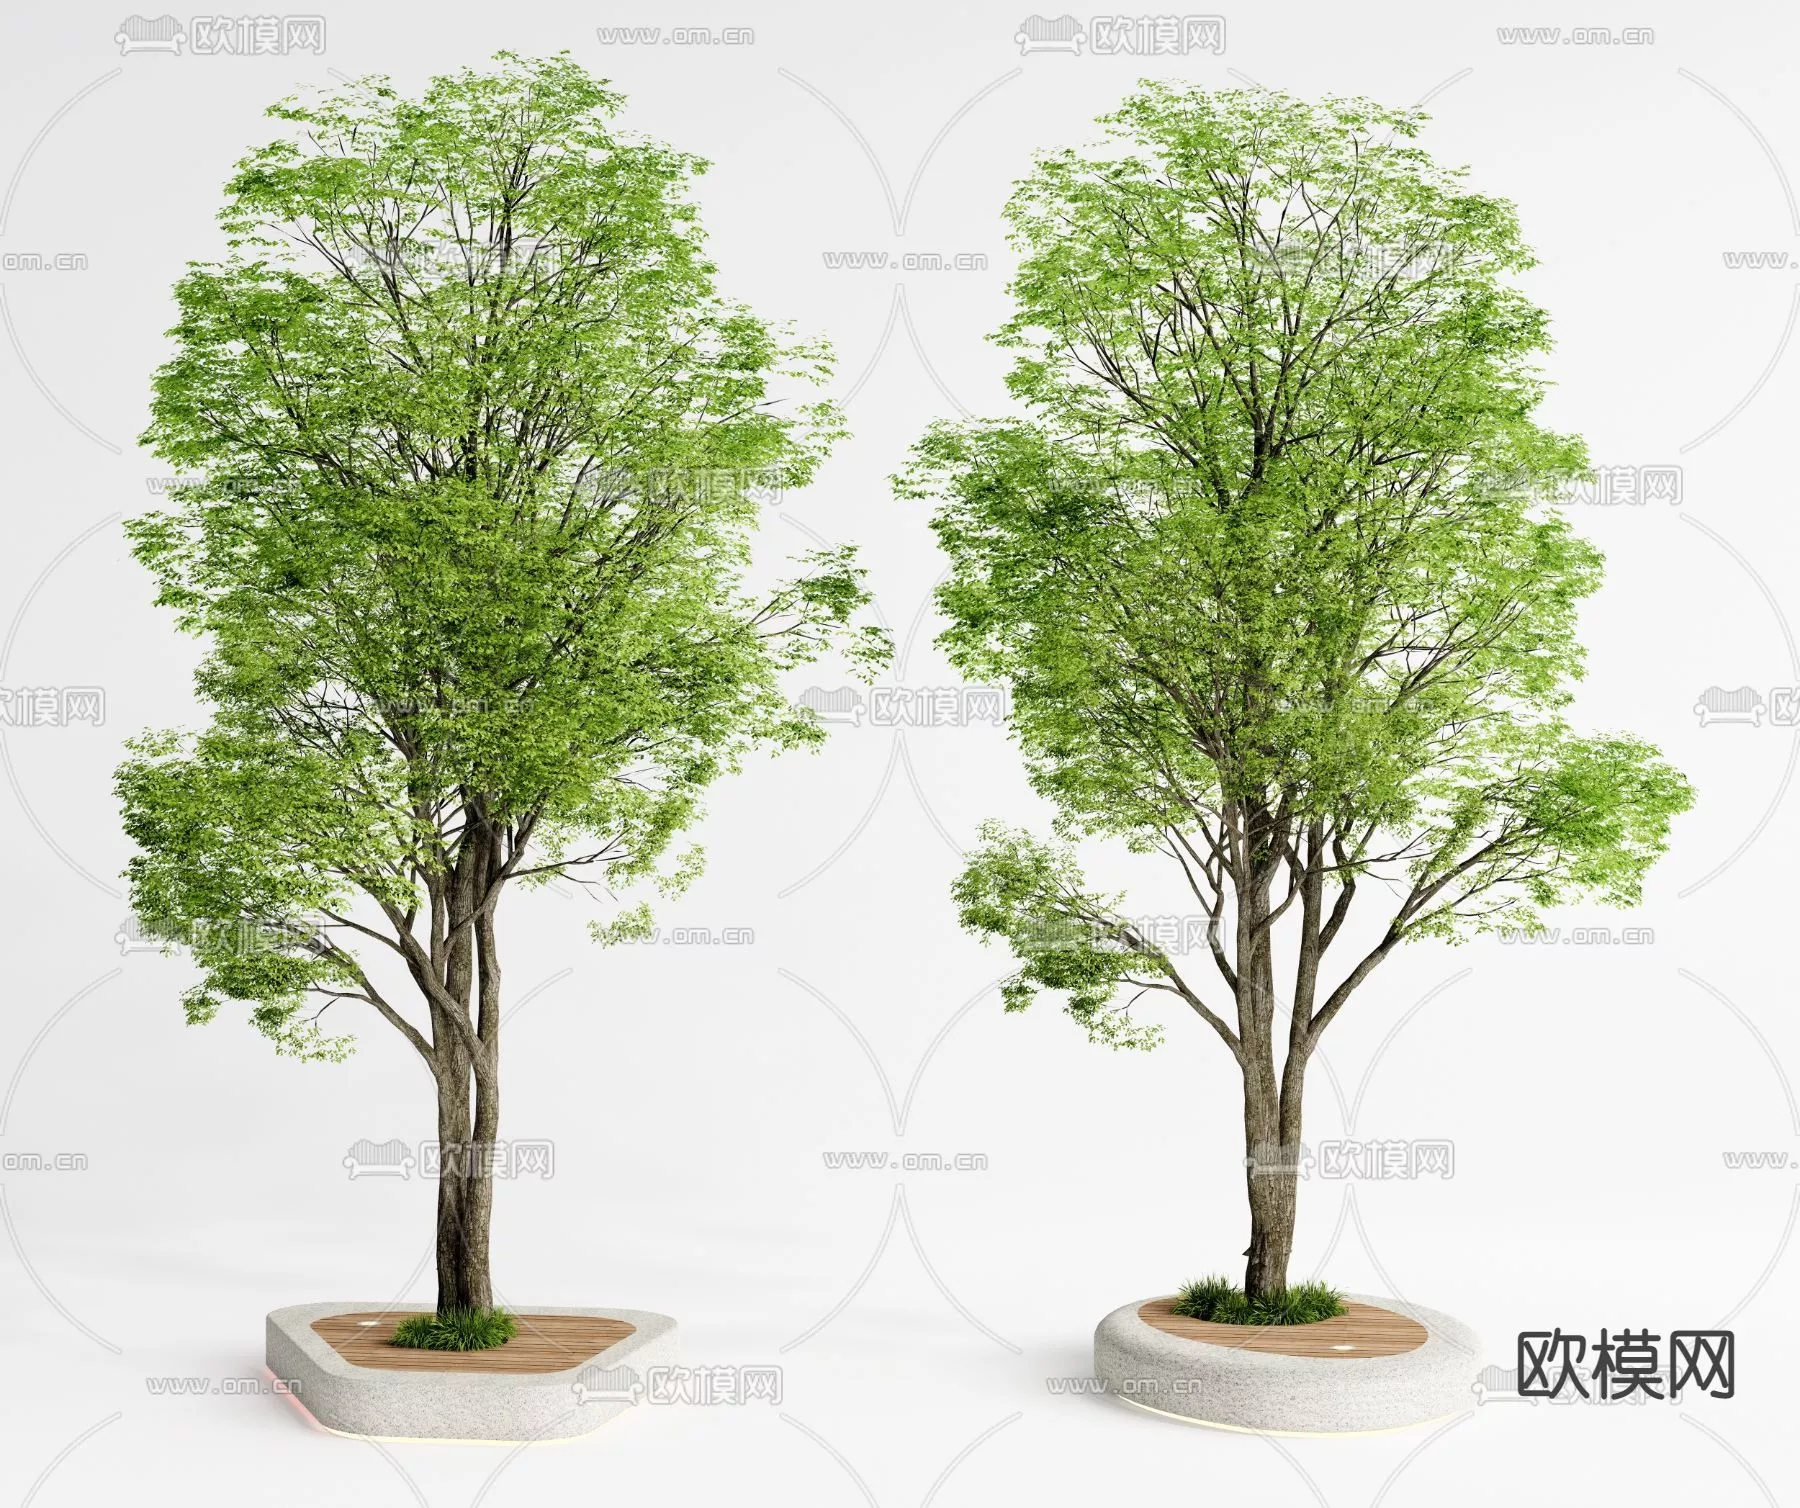 MODERN TREE - SKETCHUP 3D MODEL - VRAY OR ENSCAPE - ID15404